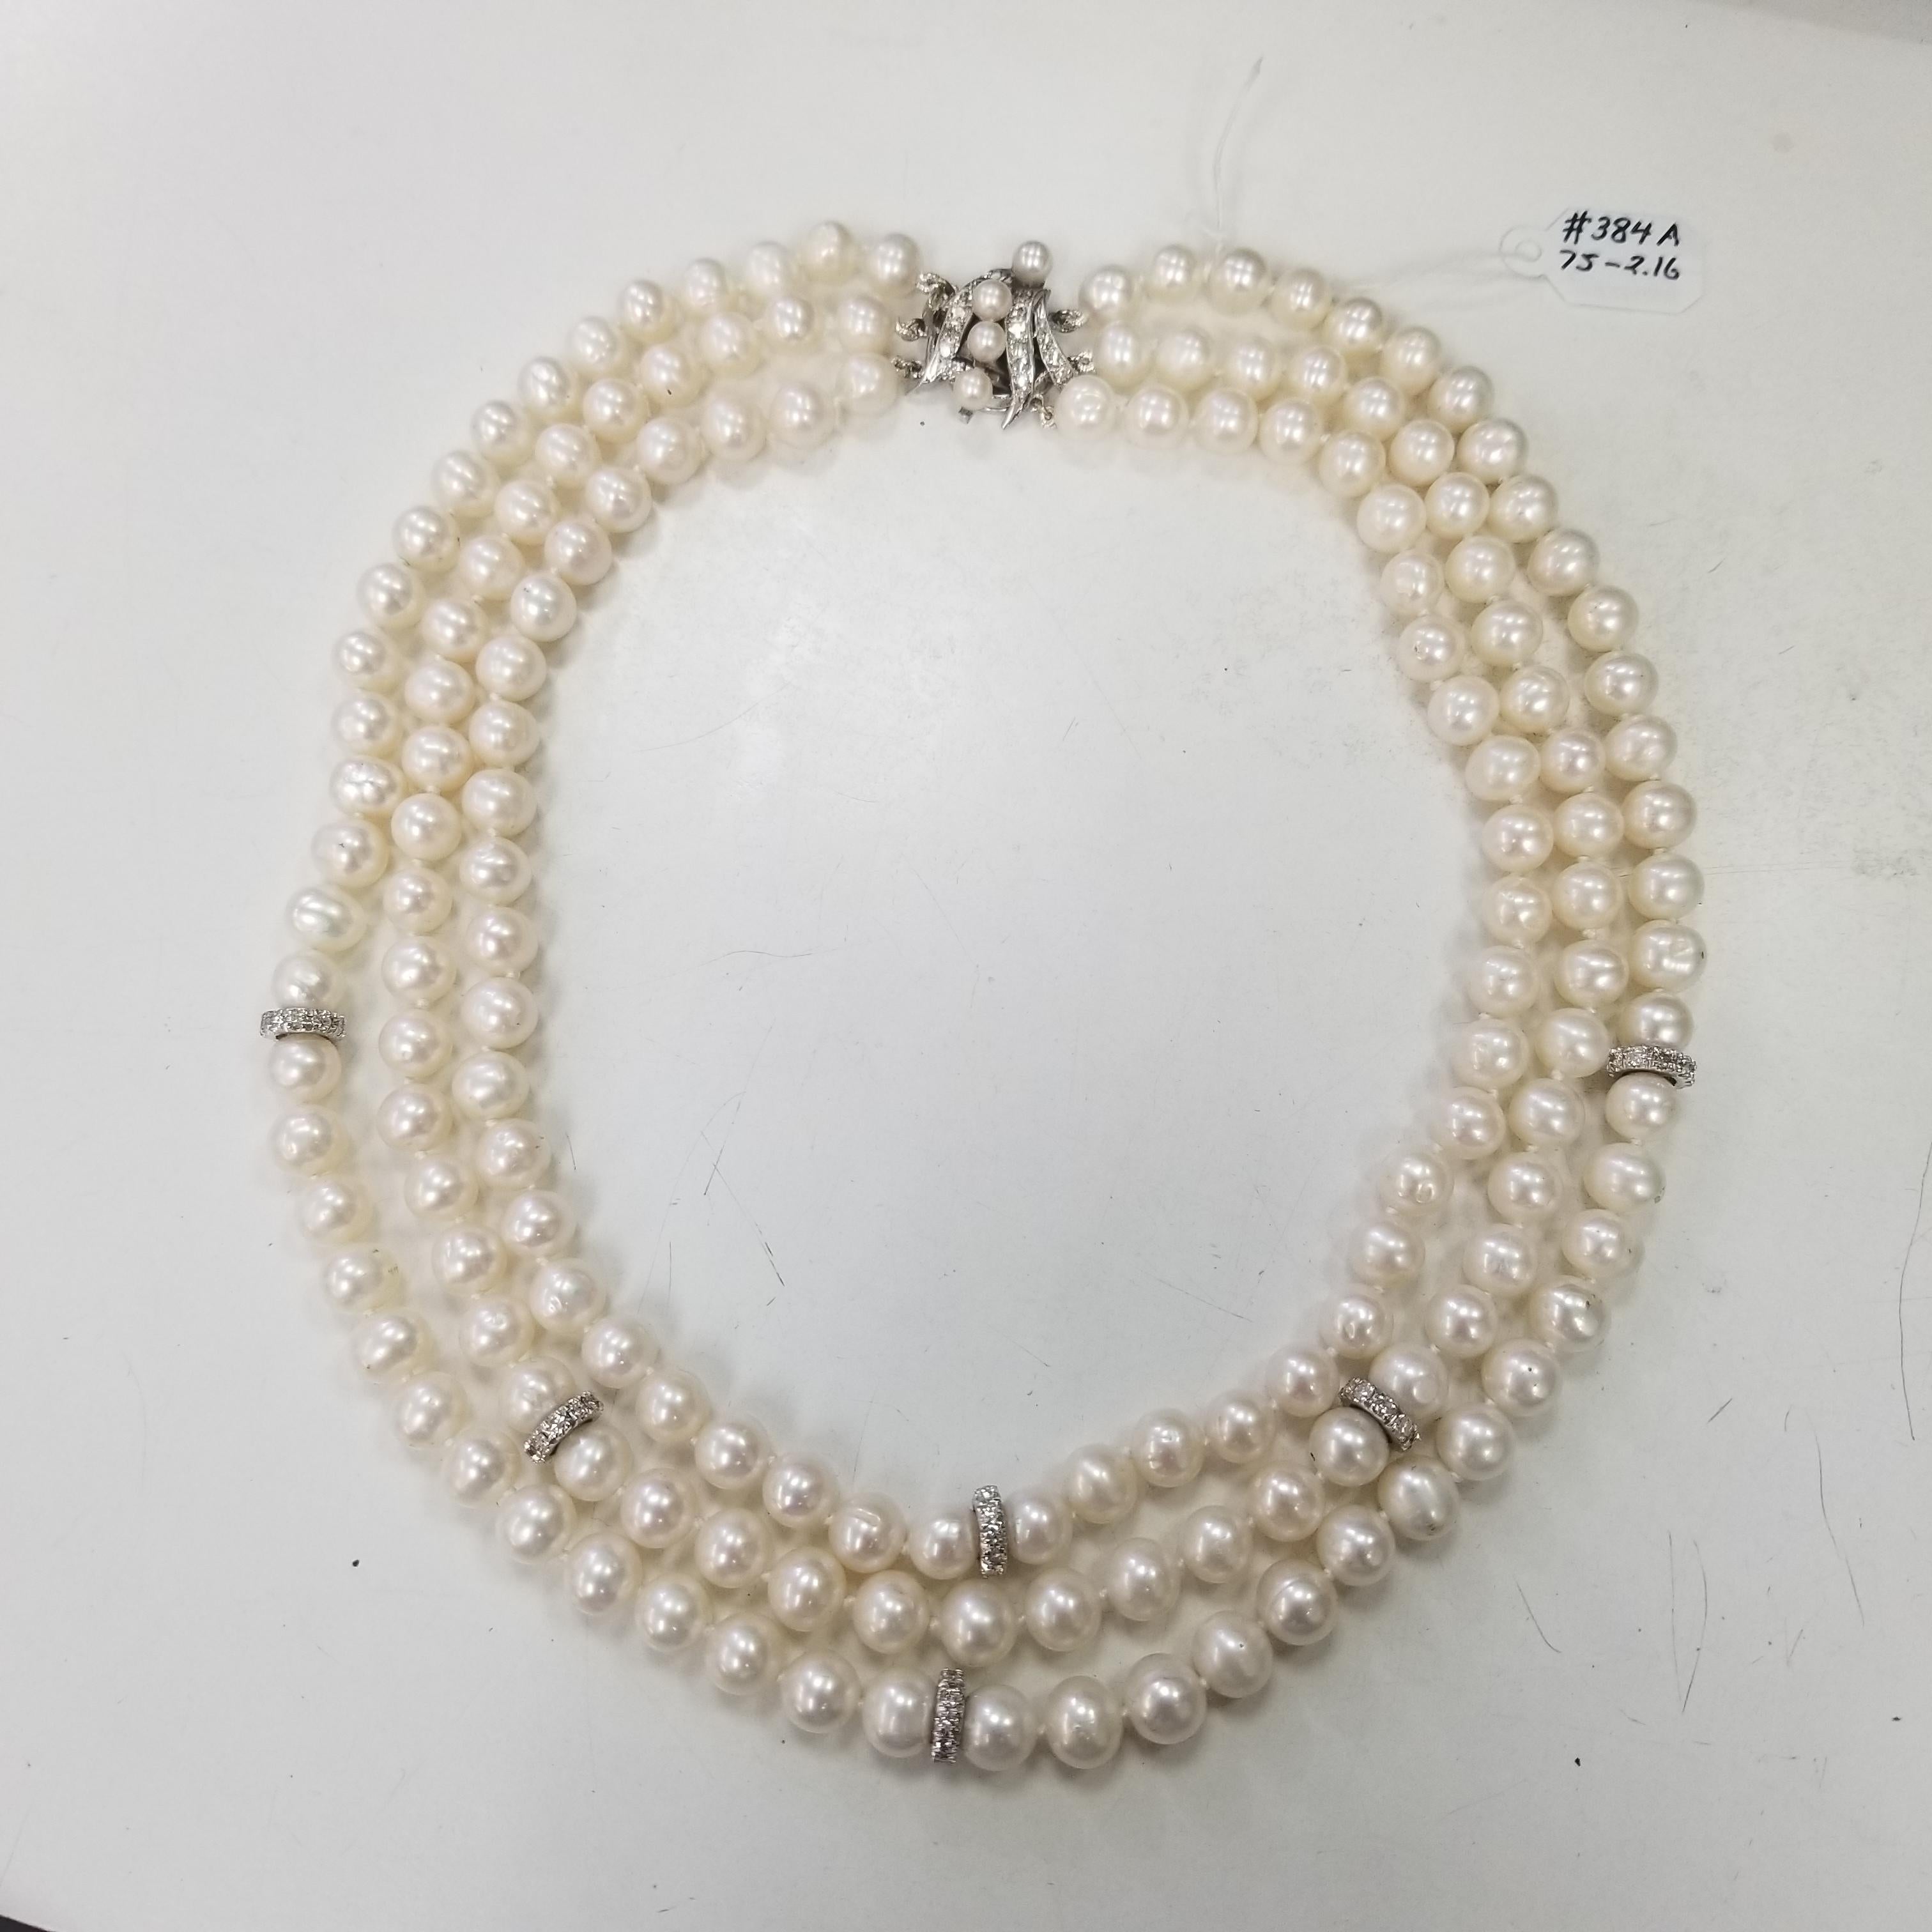 Three (3) strands of fresh water cultured pearls 7.5-7.75mm enhanced with 14k white gold and diamond rondles. The three strands together create a lovely layered collar look. This necklace is a pleasing 15 inch, 17 inch and 19 inch length with 20mm